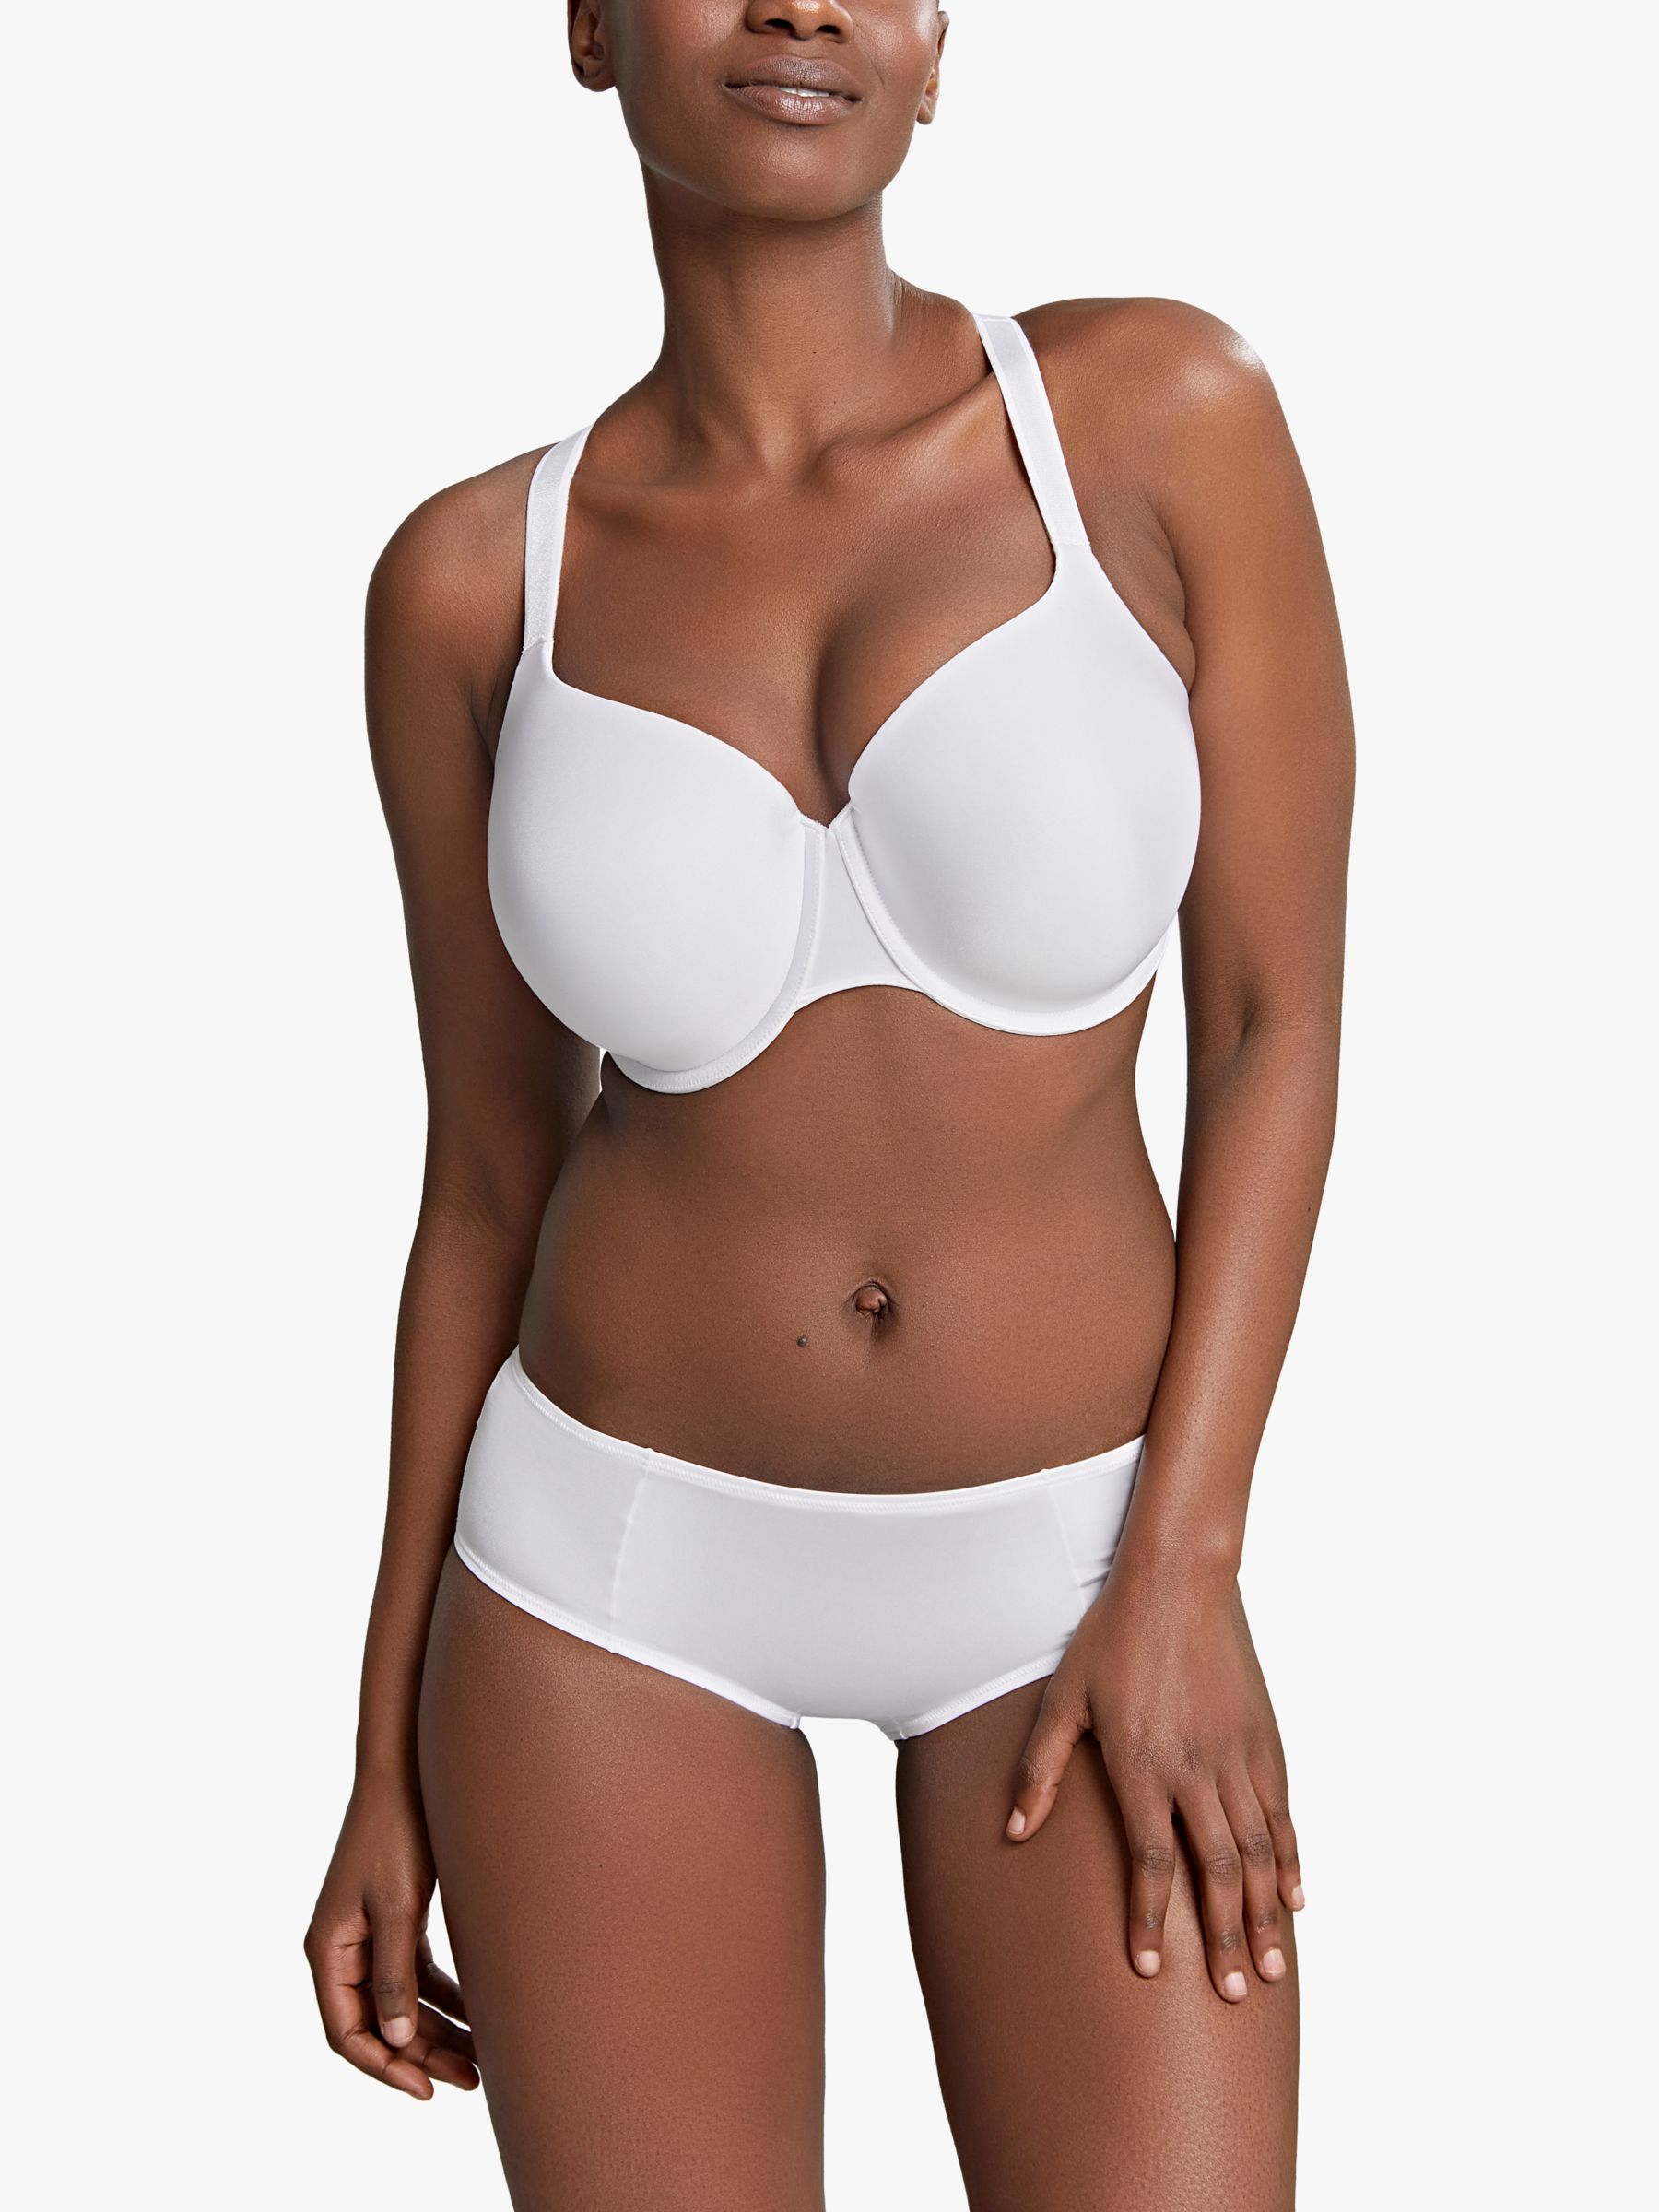 Panache Andorra Underwired Full Cup Bra, White at John Lewis & Partners